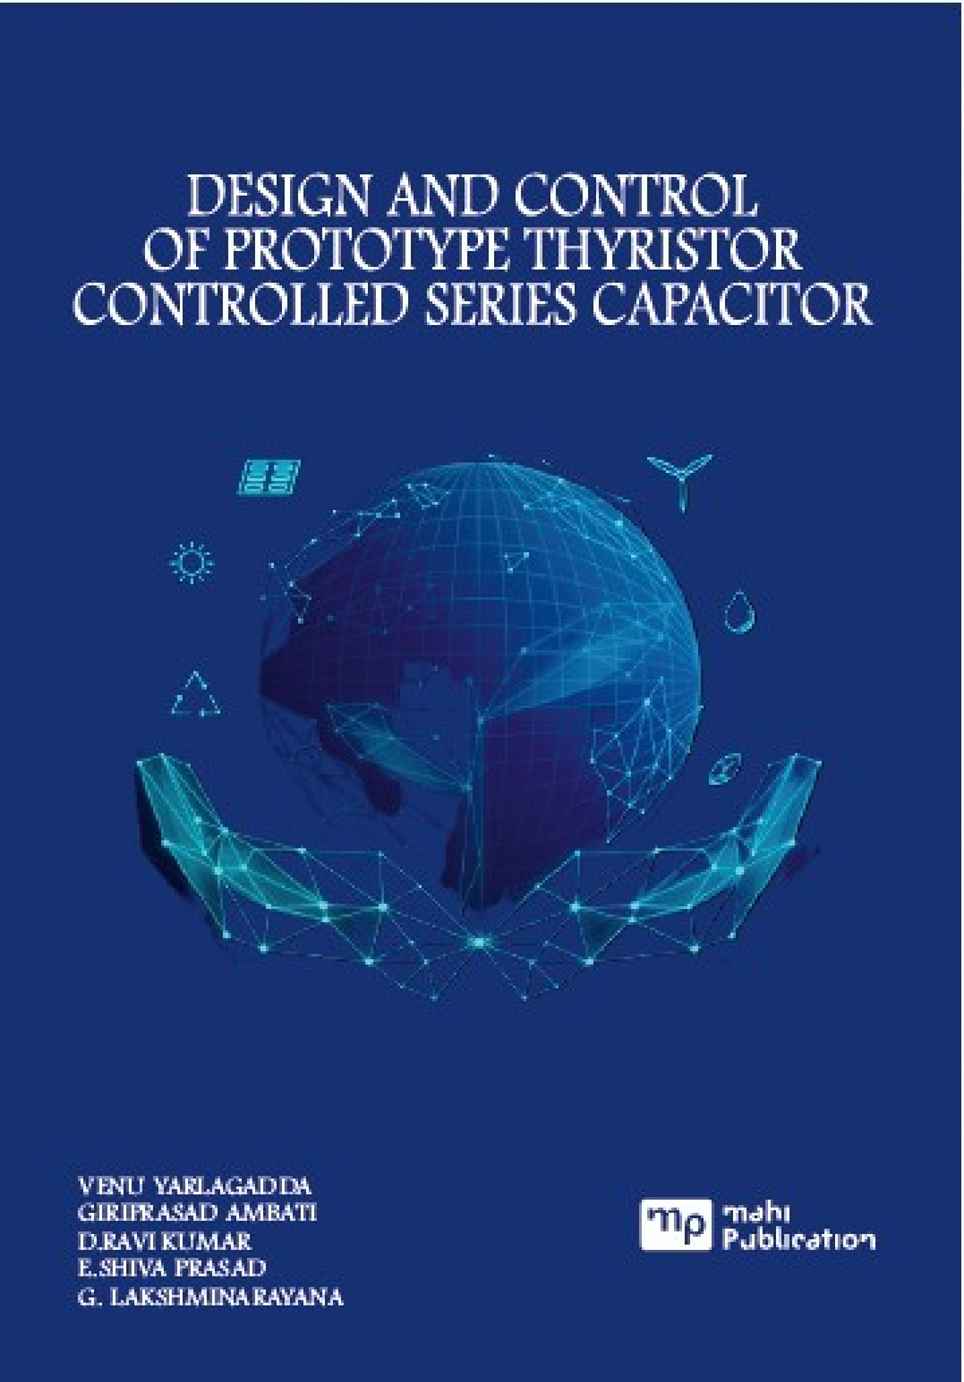 Design and Control of Prototype Thyristor Controlled Series Capacitor